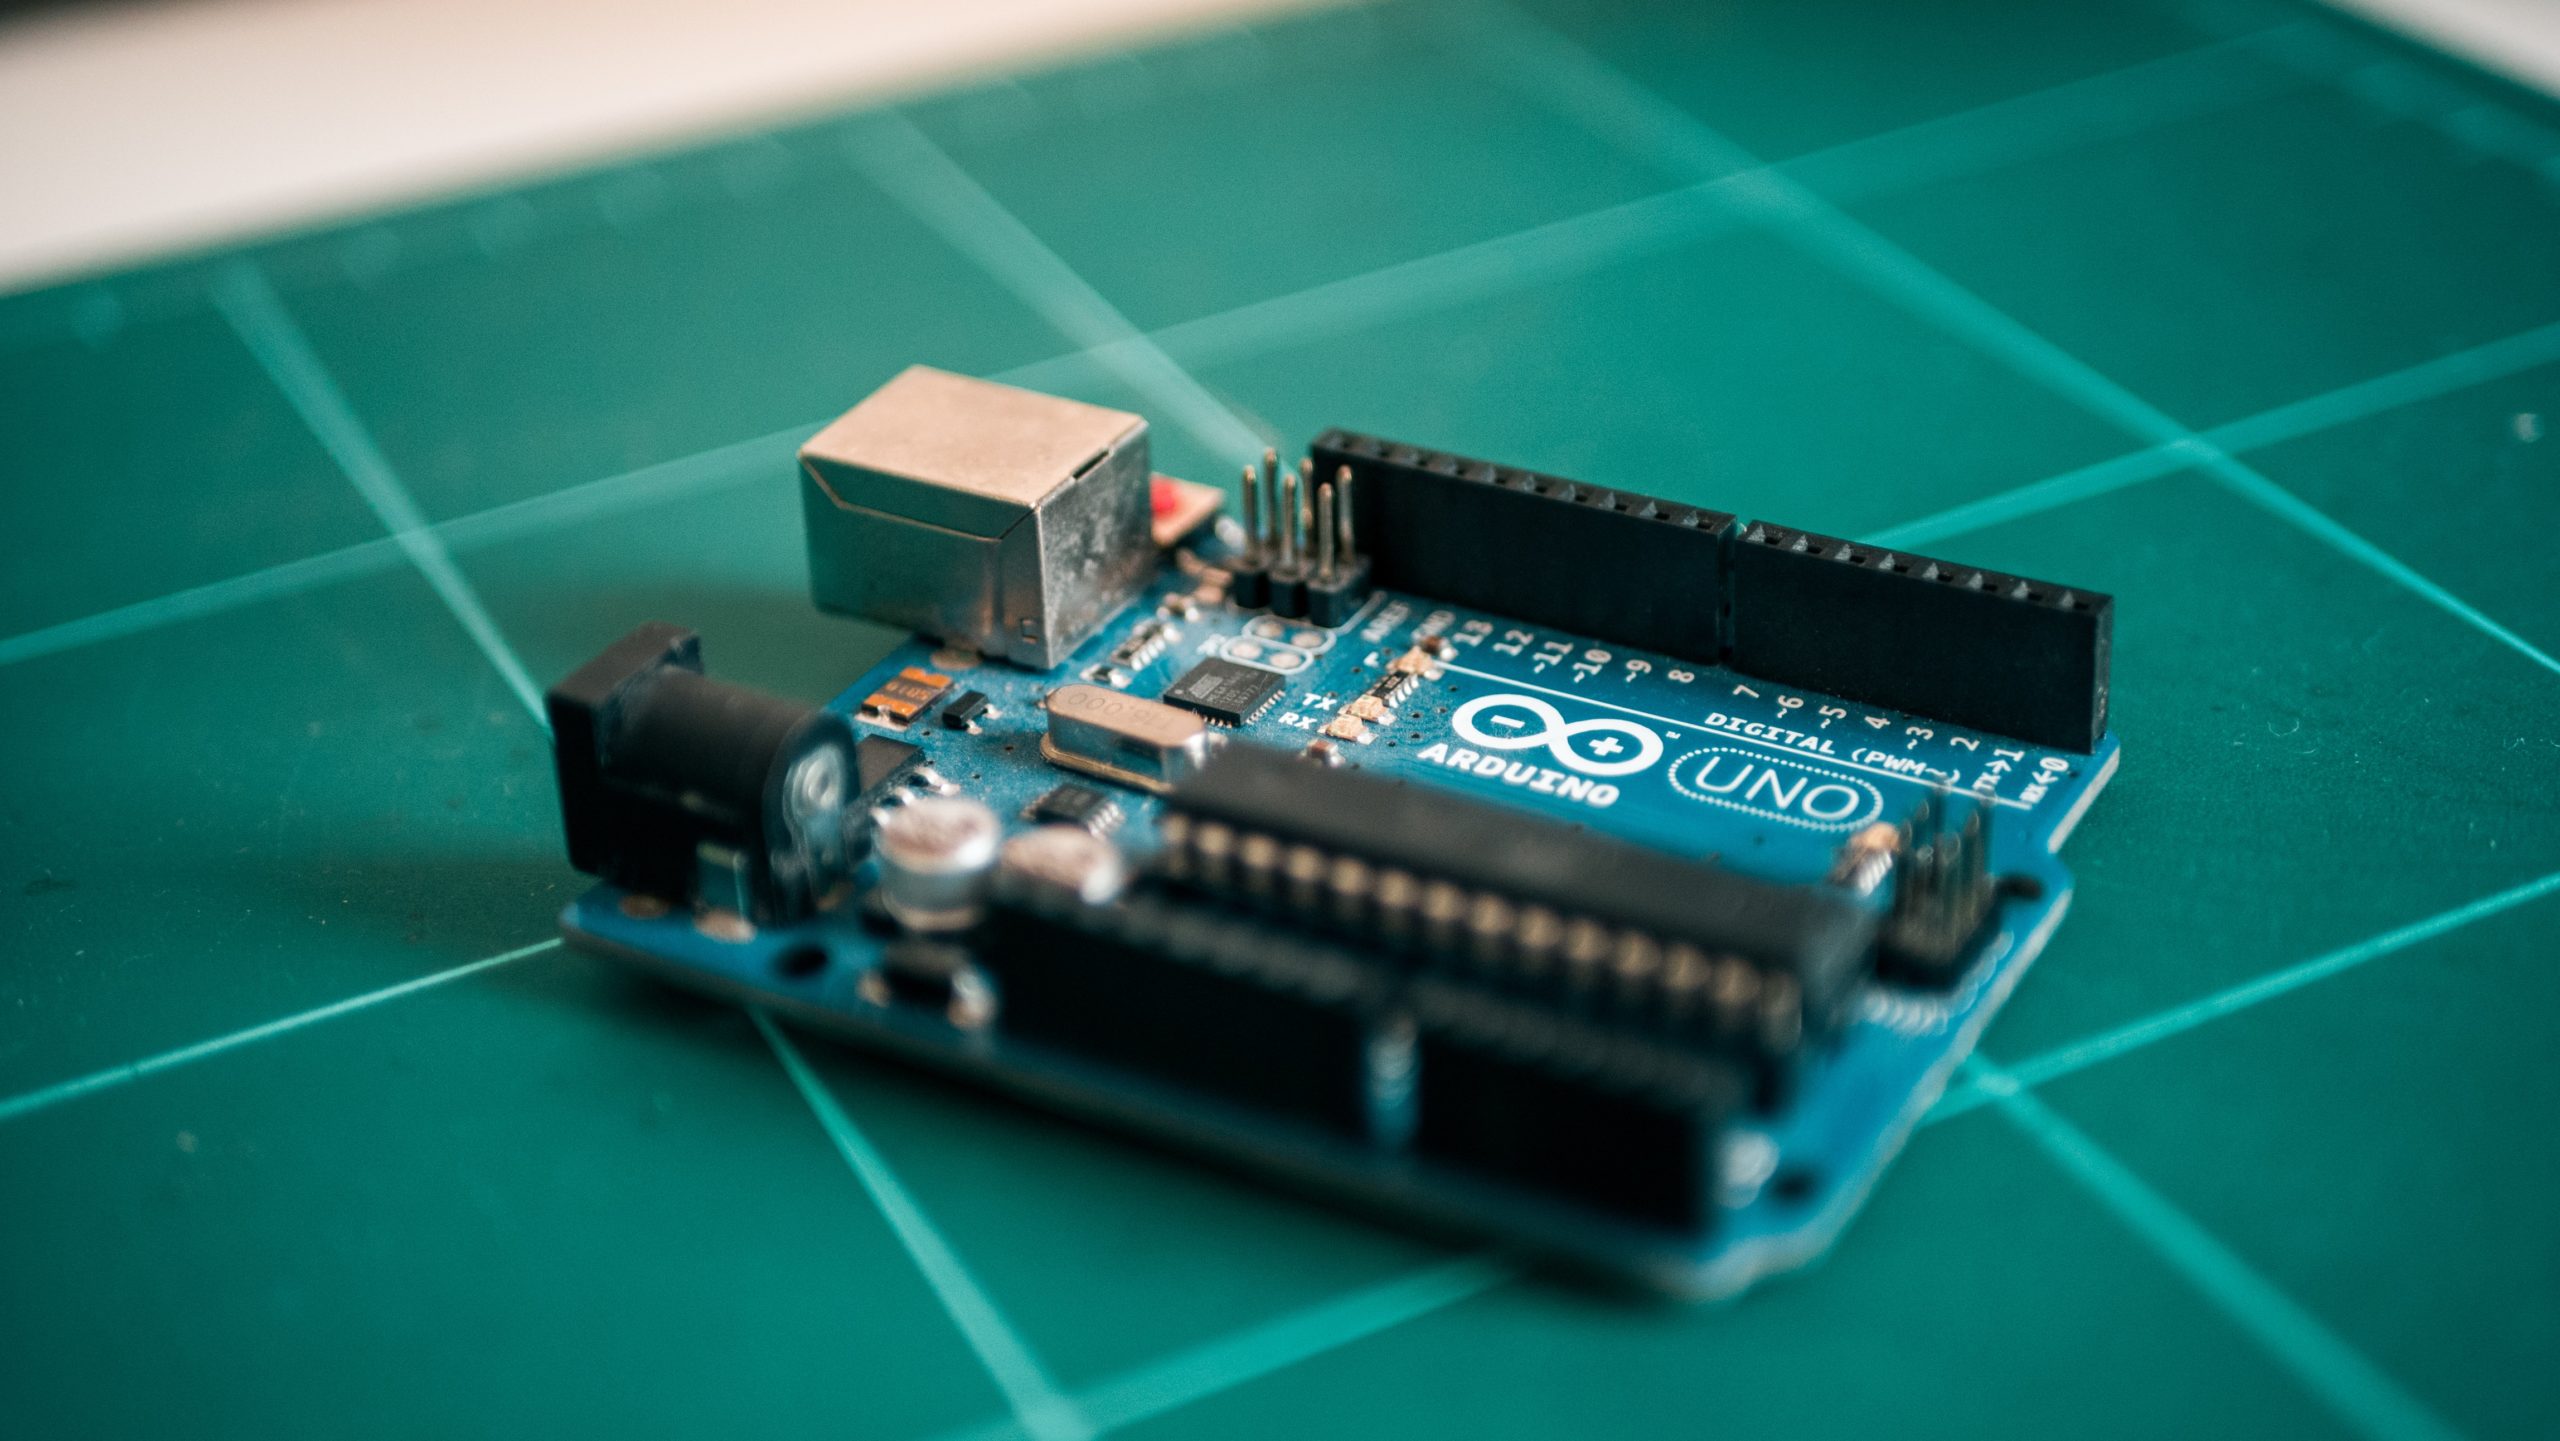 Introduction To Arduino Uno